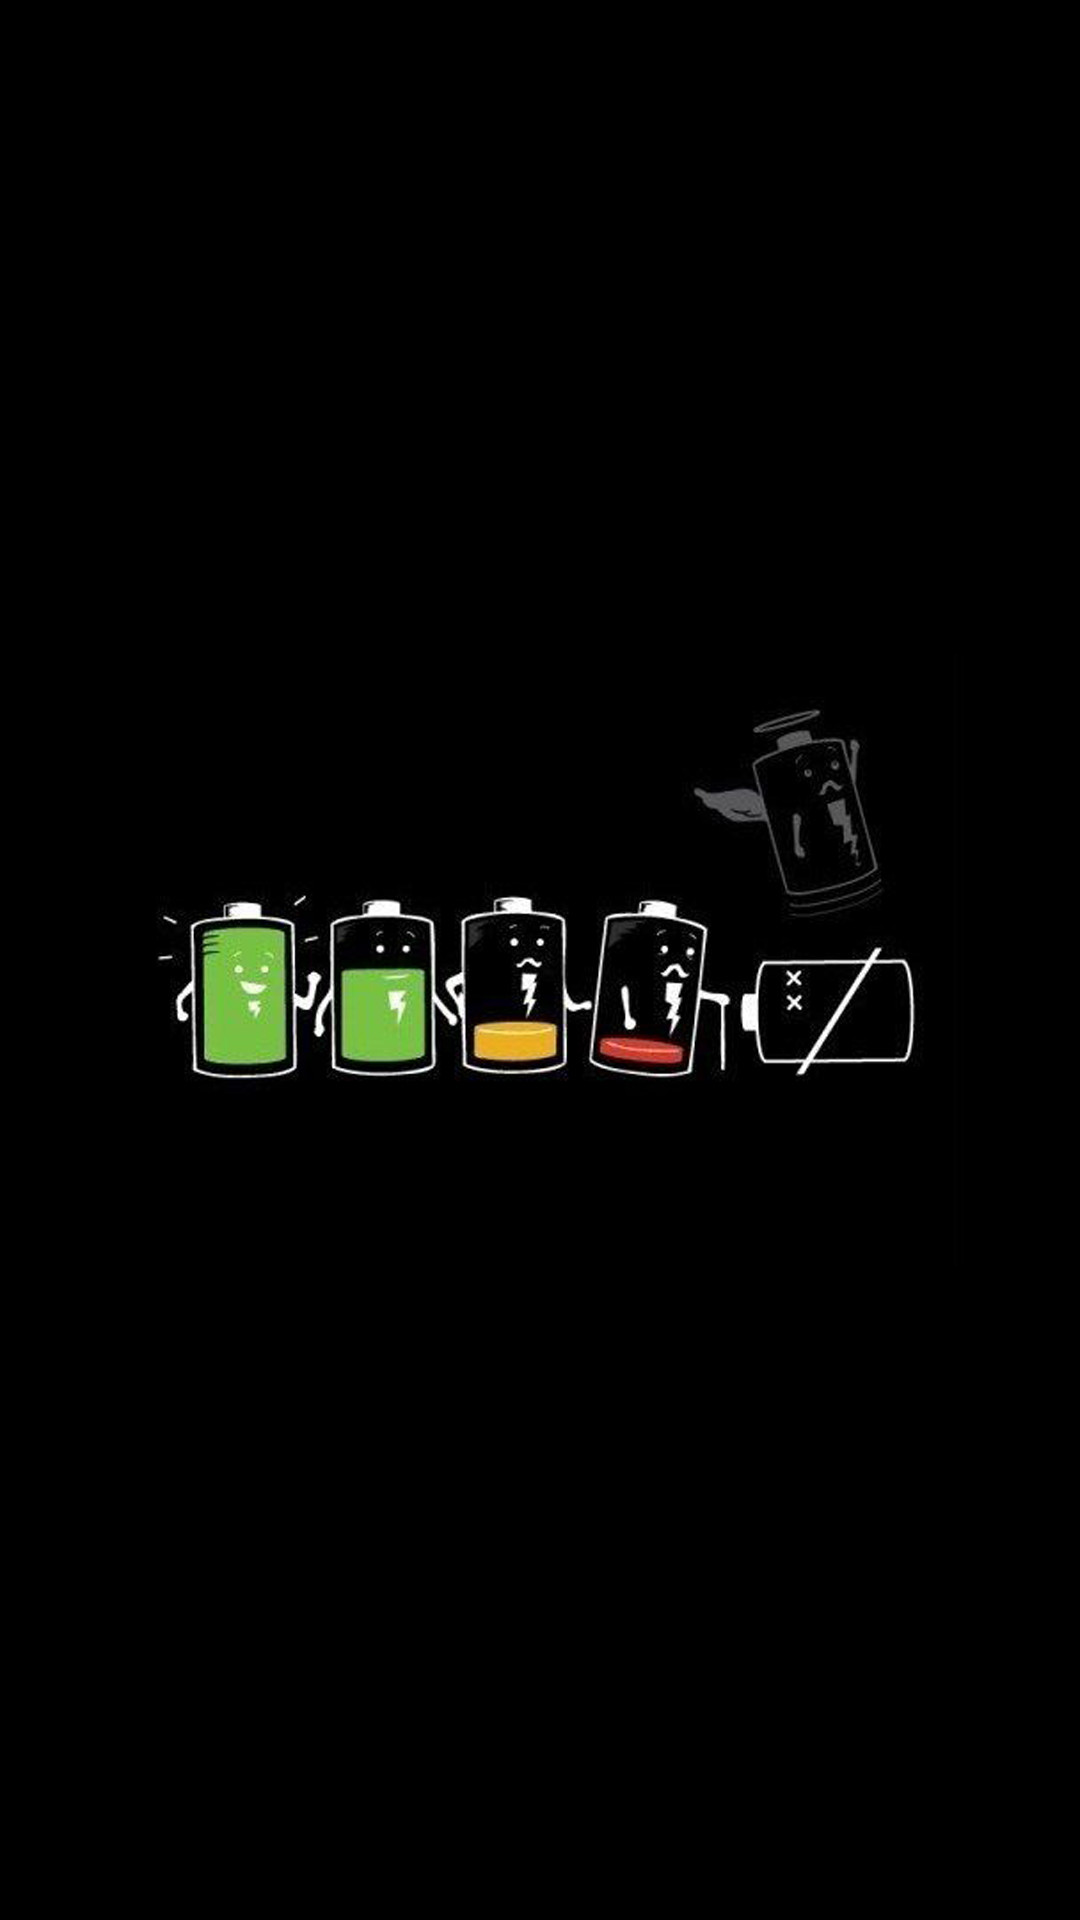 1080x1920 Battery Life Cycle Funny iPhone 6+ HD Wallpaper - http://freebestpicture.